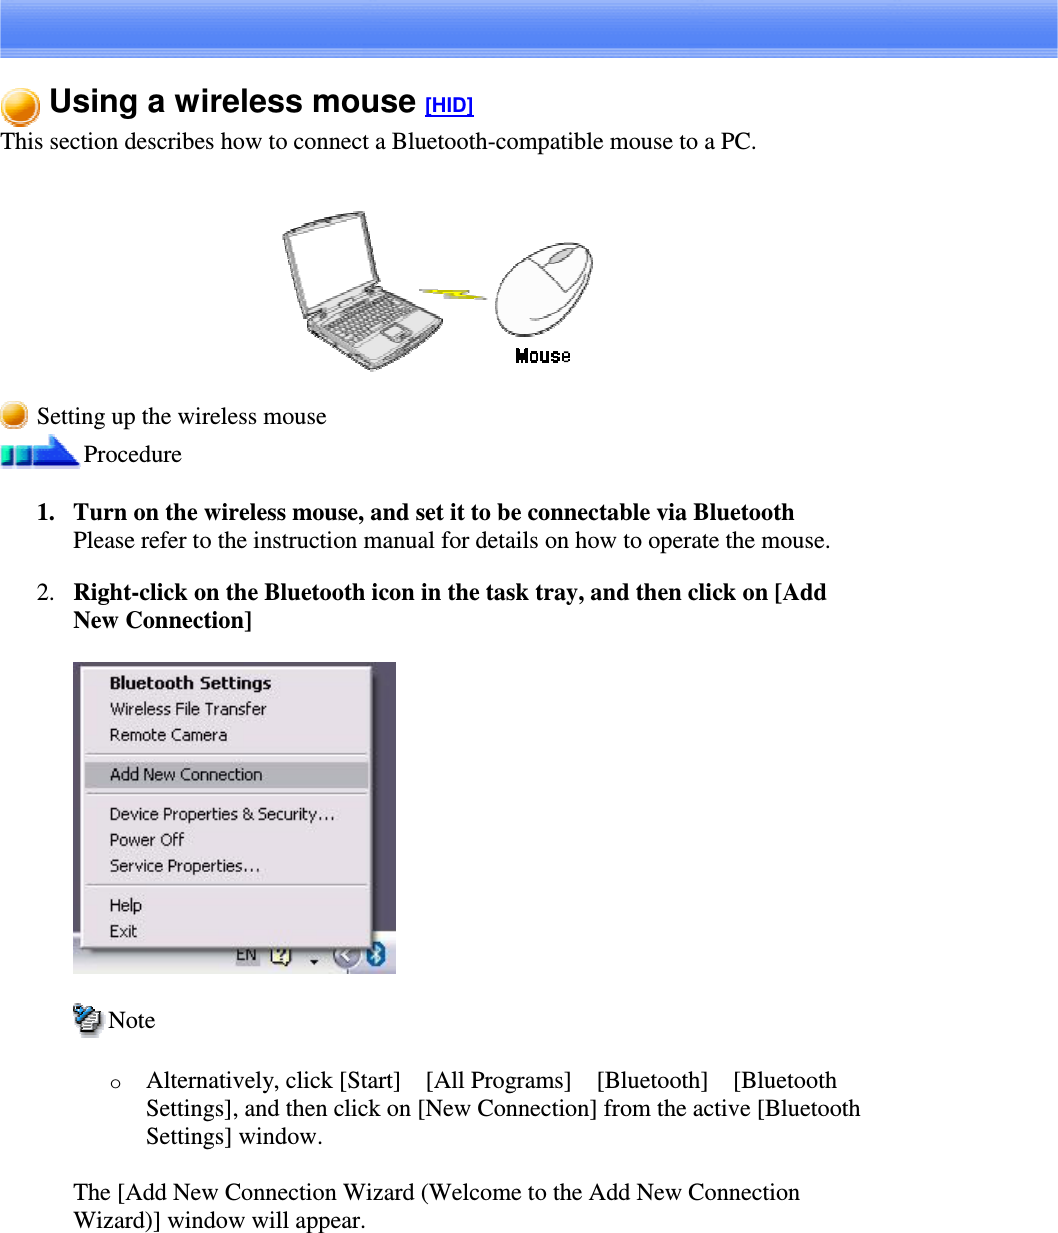 Using a wireless mouse [HID]This section describes how to connect a Bluetooth-compatible mouse to a PC.Setting up the wireless mouseProcedure1. Turn on the wireless mouse, and set it to be connectable via BluetoothPlease refer to the instruction manual for details on how to operate the mouse.2. Right-clickontheBluetoothiconinthetasktray,andthenclickon[AddNew Connection]NoteoAlternatively, click [Start][All Programs][Bluetooth][BluetoothSettings], and then click on [New Connection] from the active [BluetoothSettings] window.The [Add New Connection Wizard (Welcome to the Add New ConnectionWizard)] window will appear.